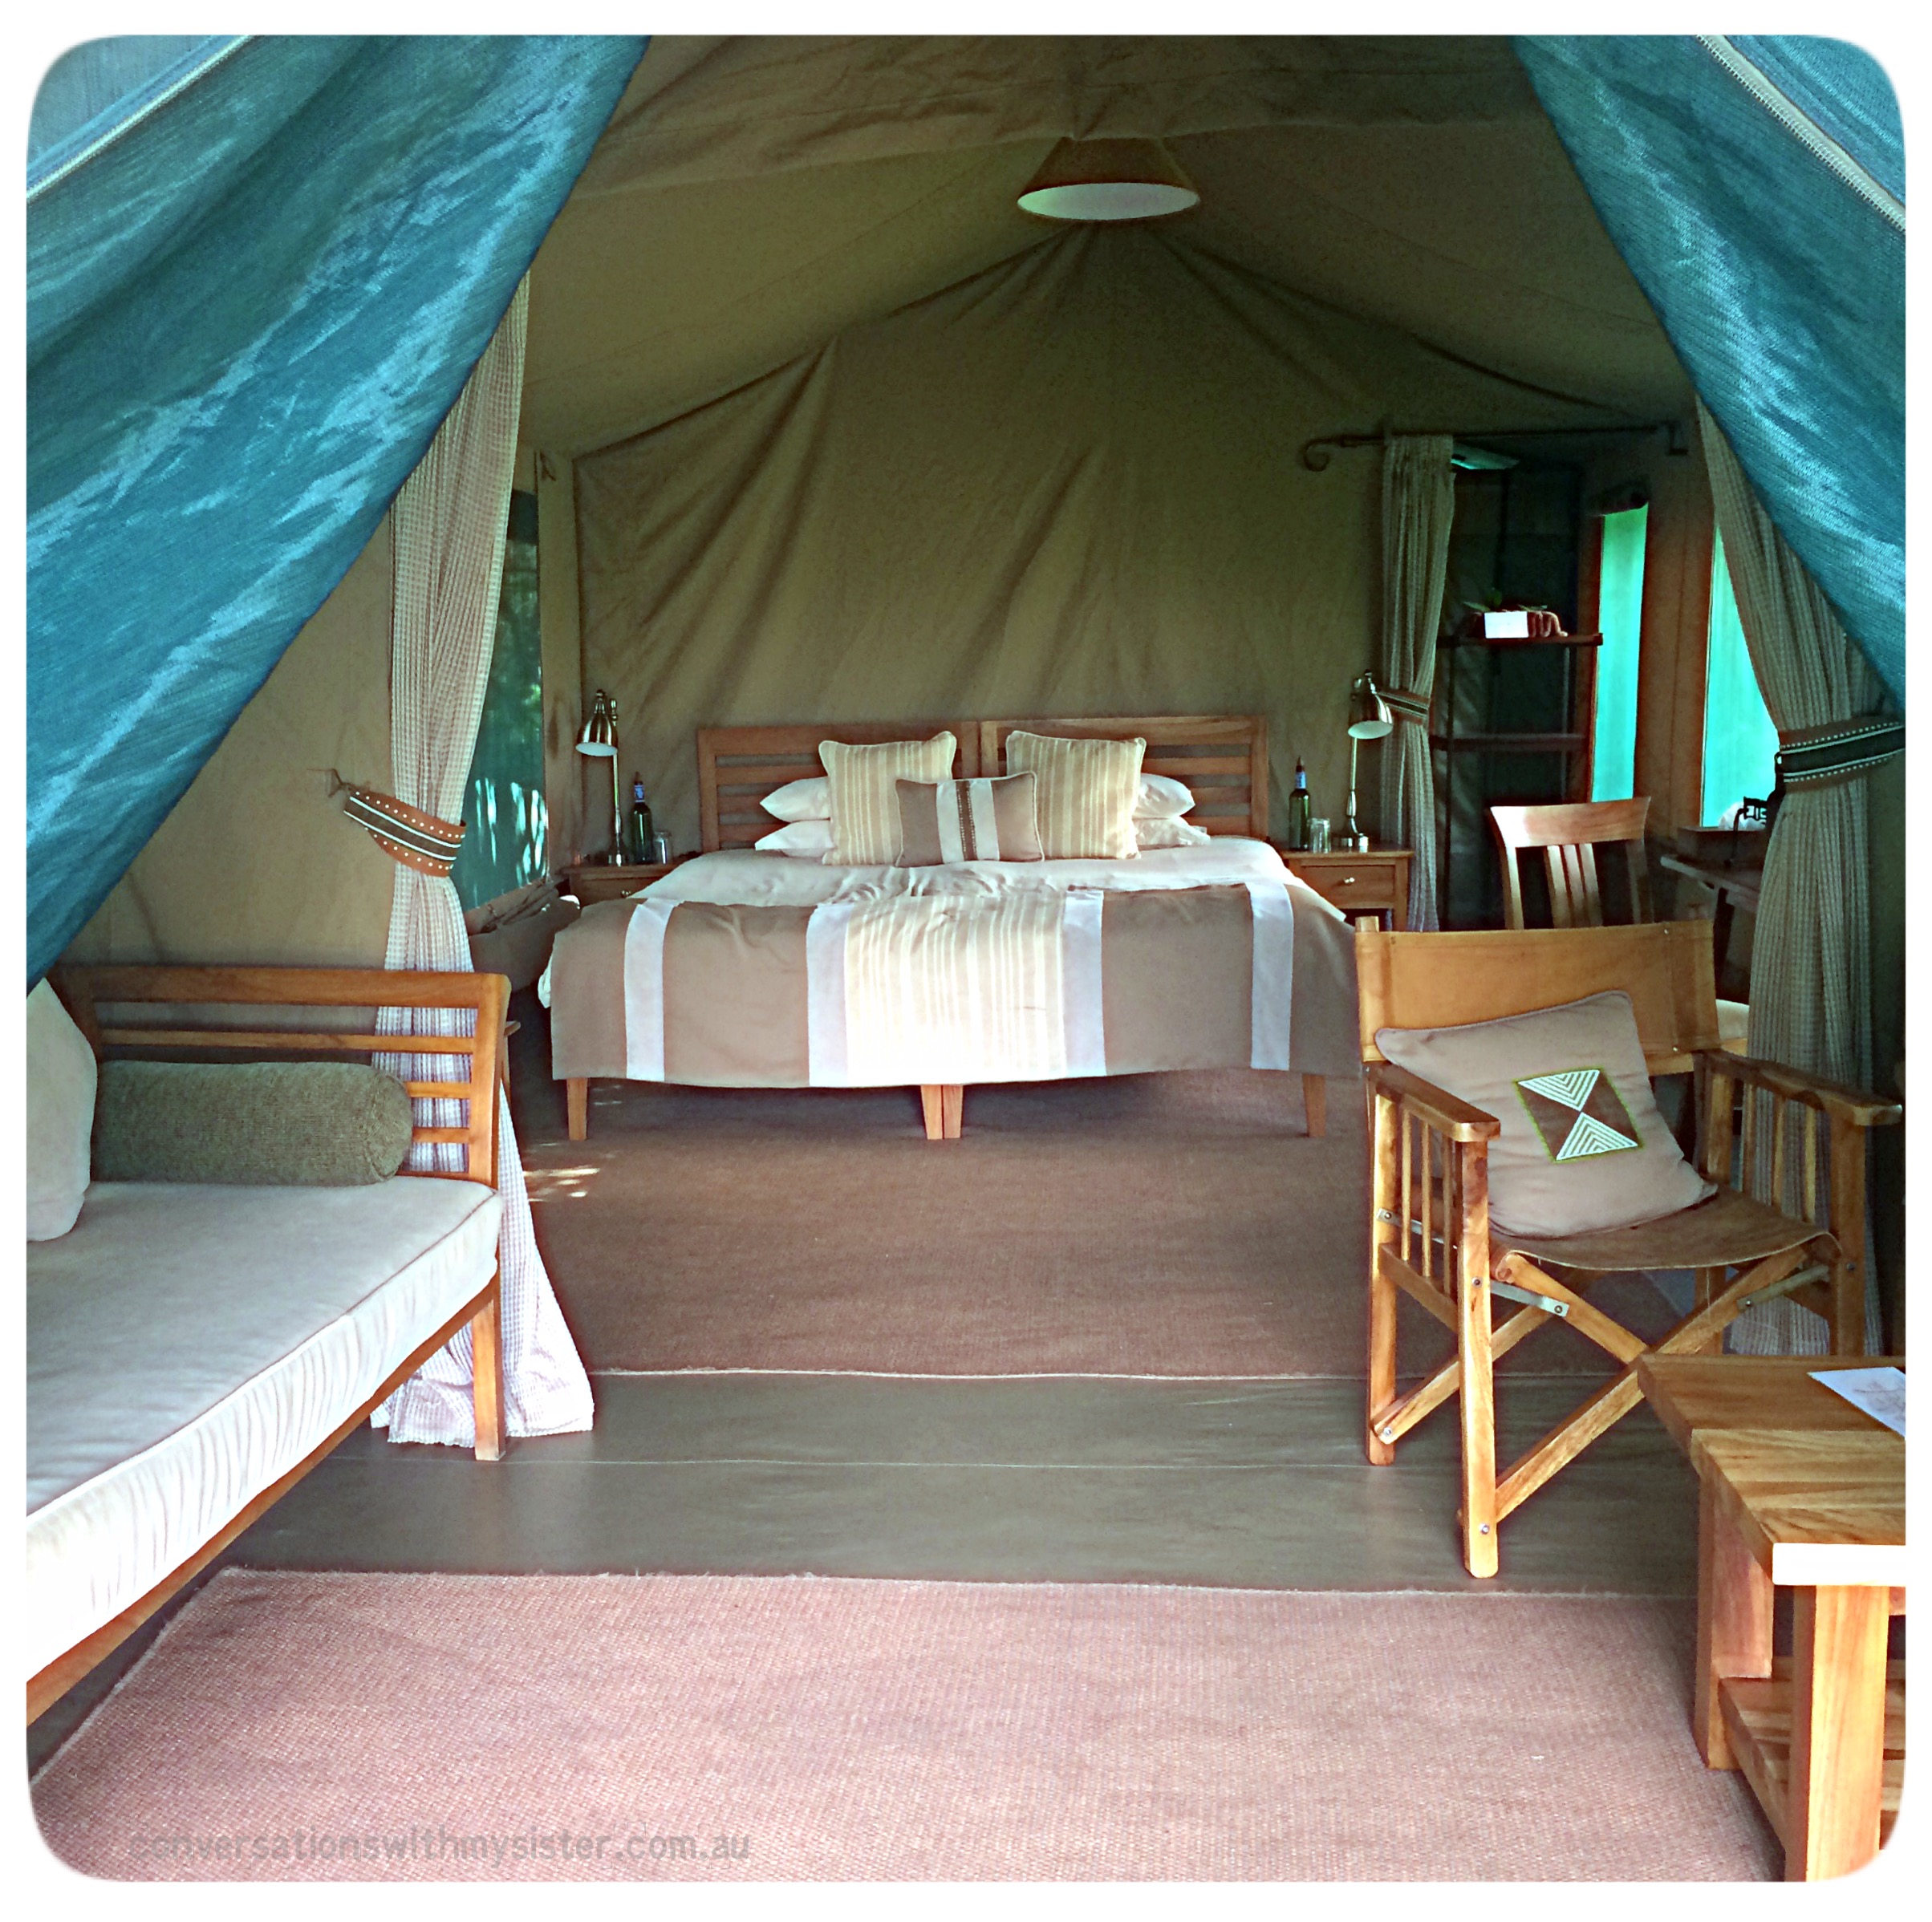 Rekero Camp is located in the heart of the Masai Mara, Kenya and this year the luxury campsite is celebrating 30 years of accommodating guests on safari. But the acknowledgements don’t stop there. In July 2017, appropriately coinciding with the International Year for Sustainable Tourism for Development, Ecotourism Kenya awarded Rekero Camp the prestigious GOLD Eco-rating Certification to recognise their consistent level of excellence. Read all the details here